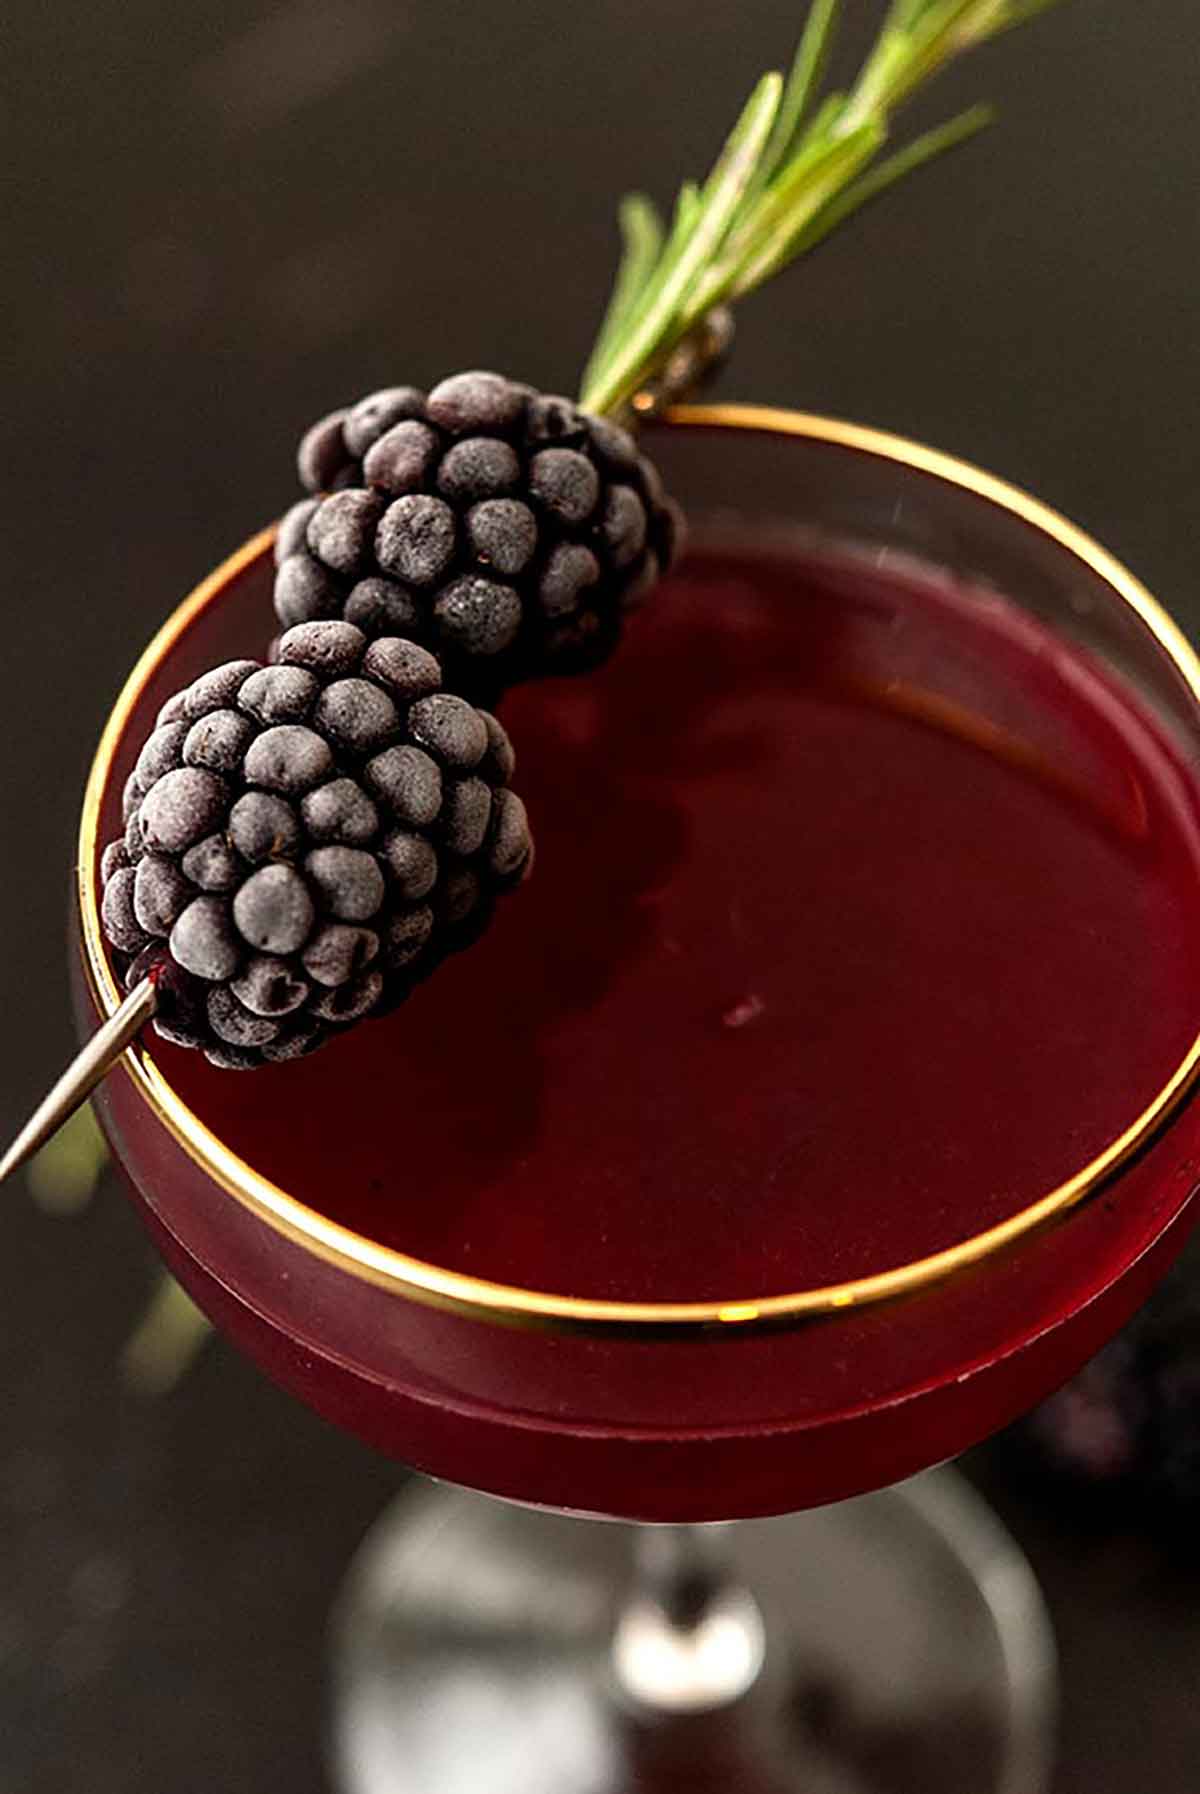 The frosted blackberry garnish on a cocktail.